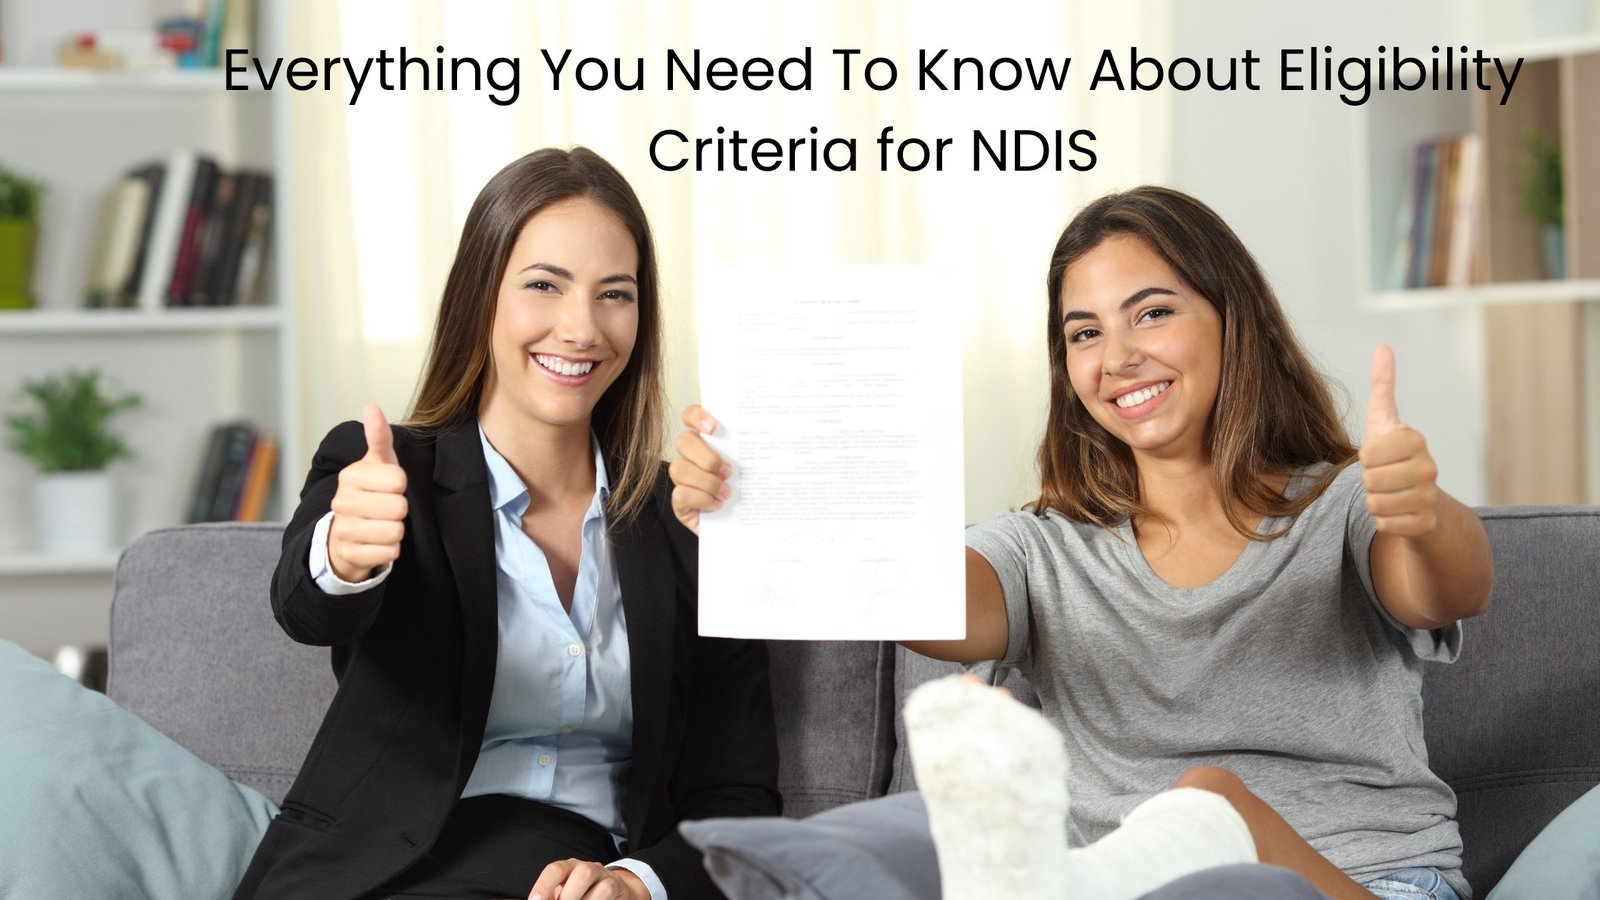 Everything You Need To Know About Eligibility Criteria for NDIS